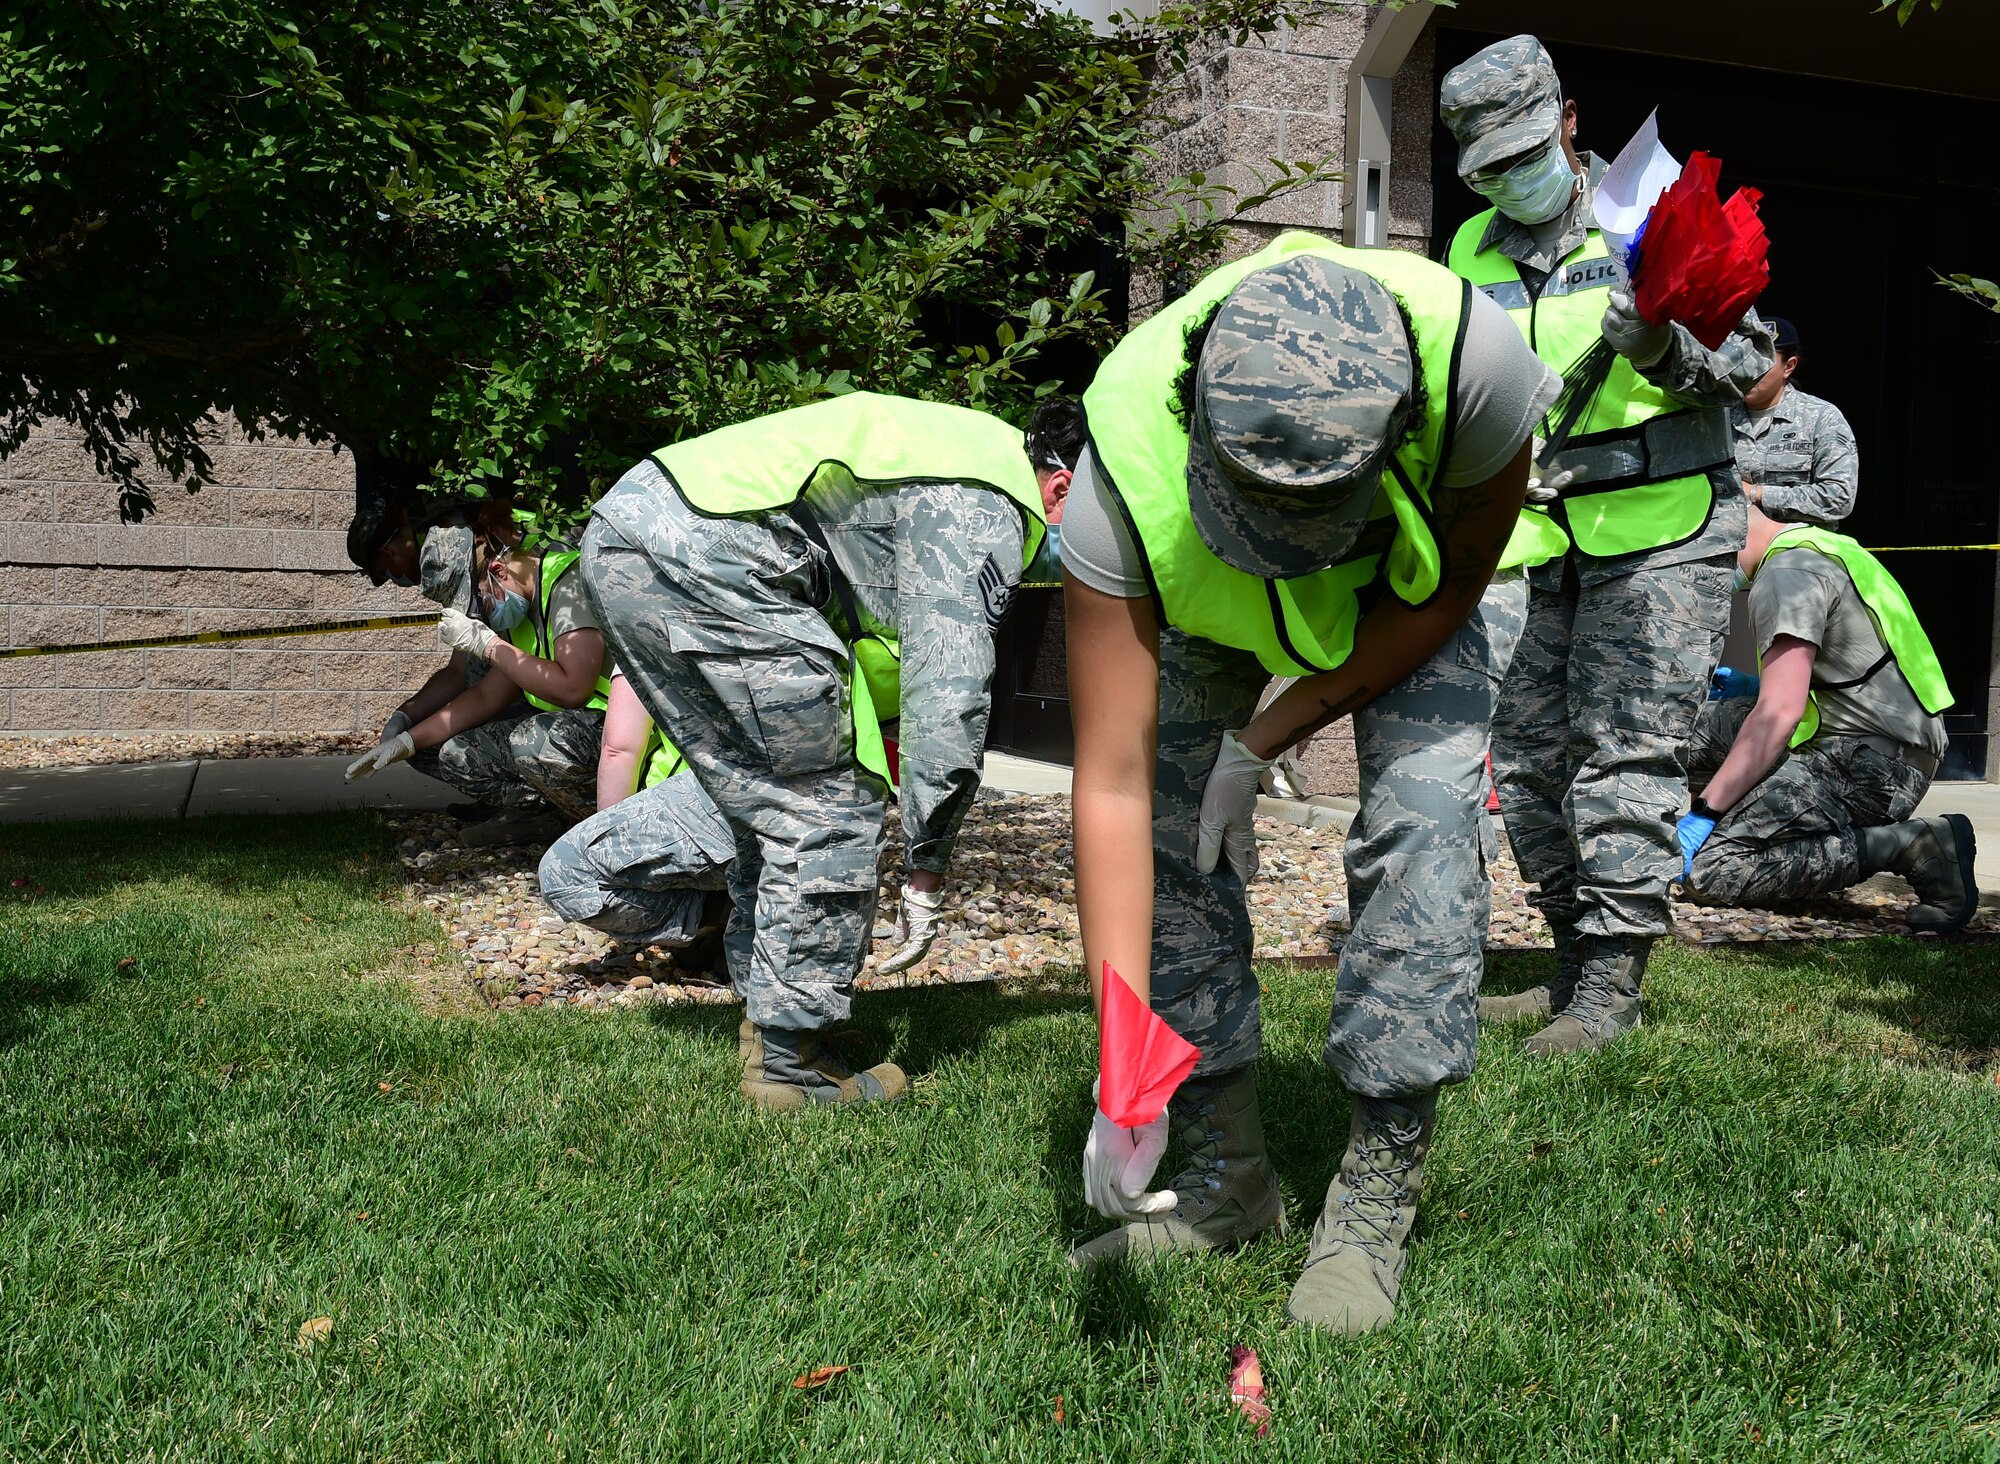 Airmen from the 460th Force Support Squadron simulate searching for human remains and personal belongings as part of search and recovery training on July 19, 2018, on Buckley Air Force Base, Colorado. To provide a realistic experience, the trainers used pieces of meat to simulate the remains. (U.S. Air Force photo by Senior Airman AJ Duprey)